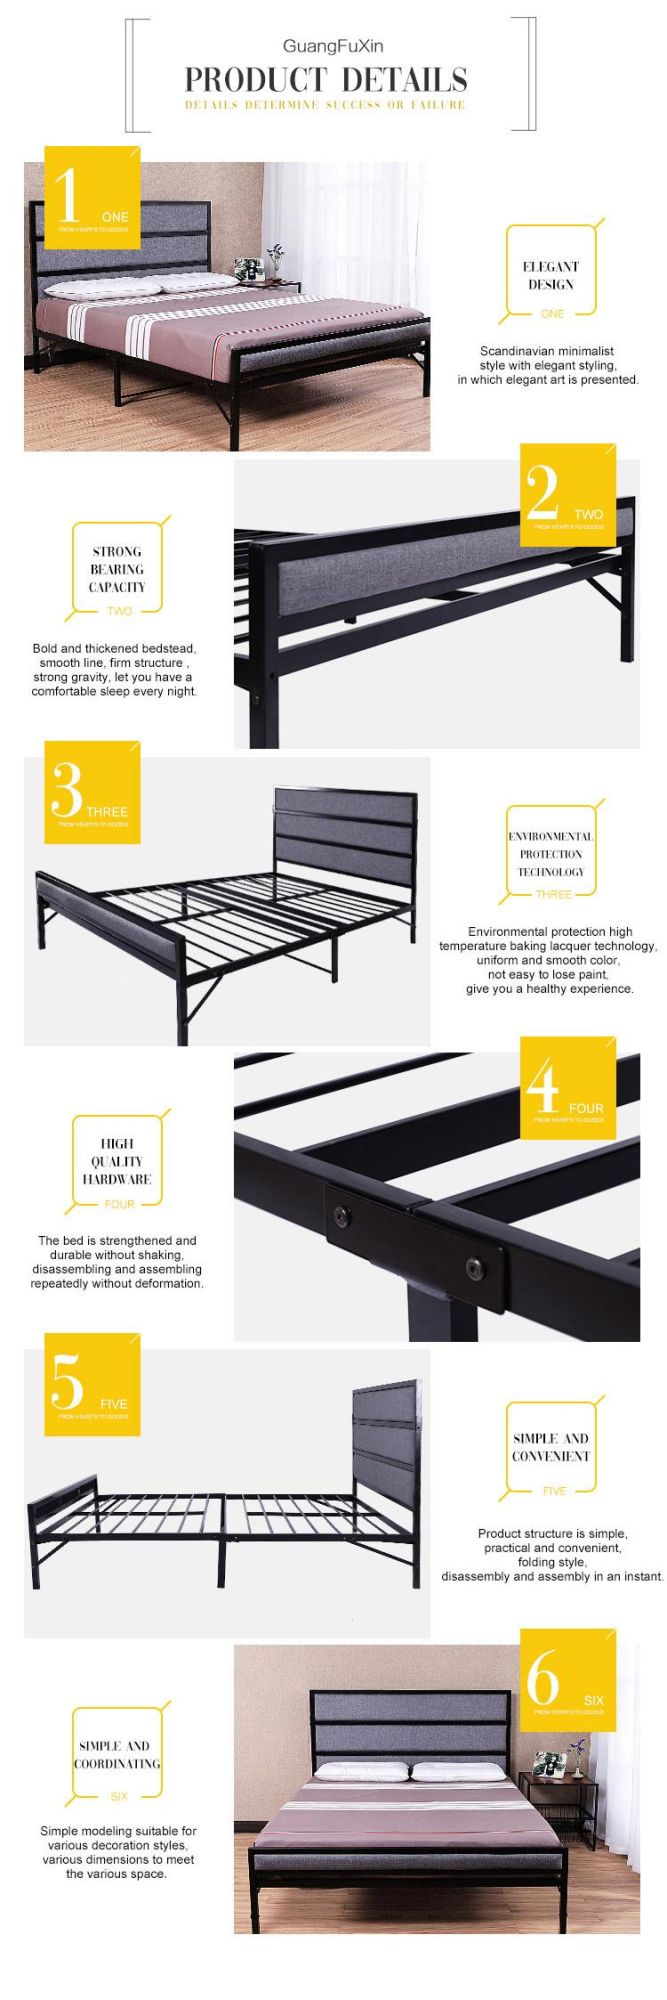 Latest Design Metal Bed Frame Simple Platform Bed Headboard Iron Frame Double Sleepingletto in Ferro Bed